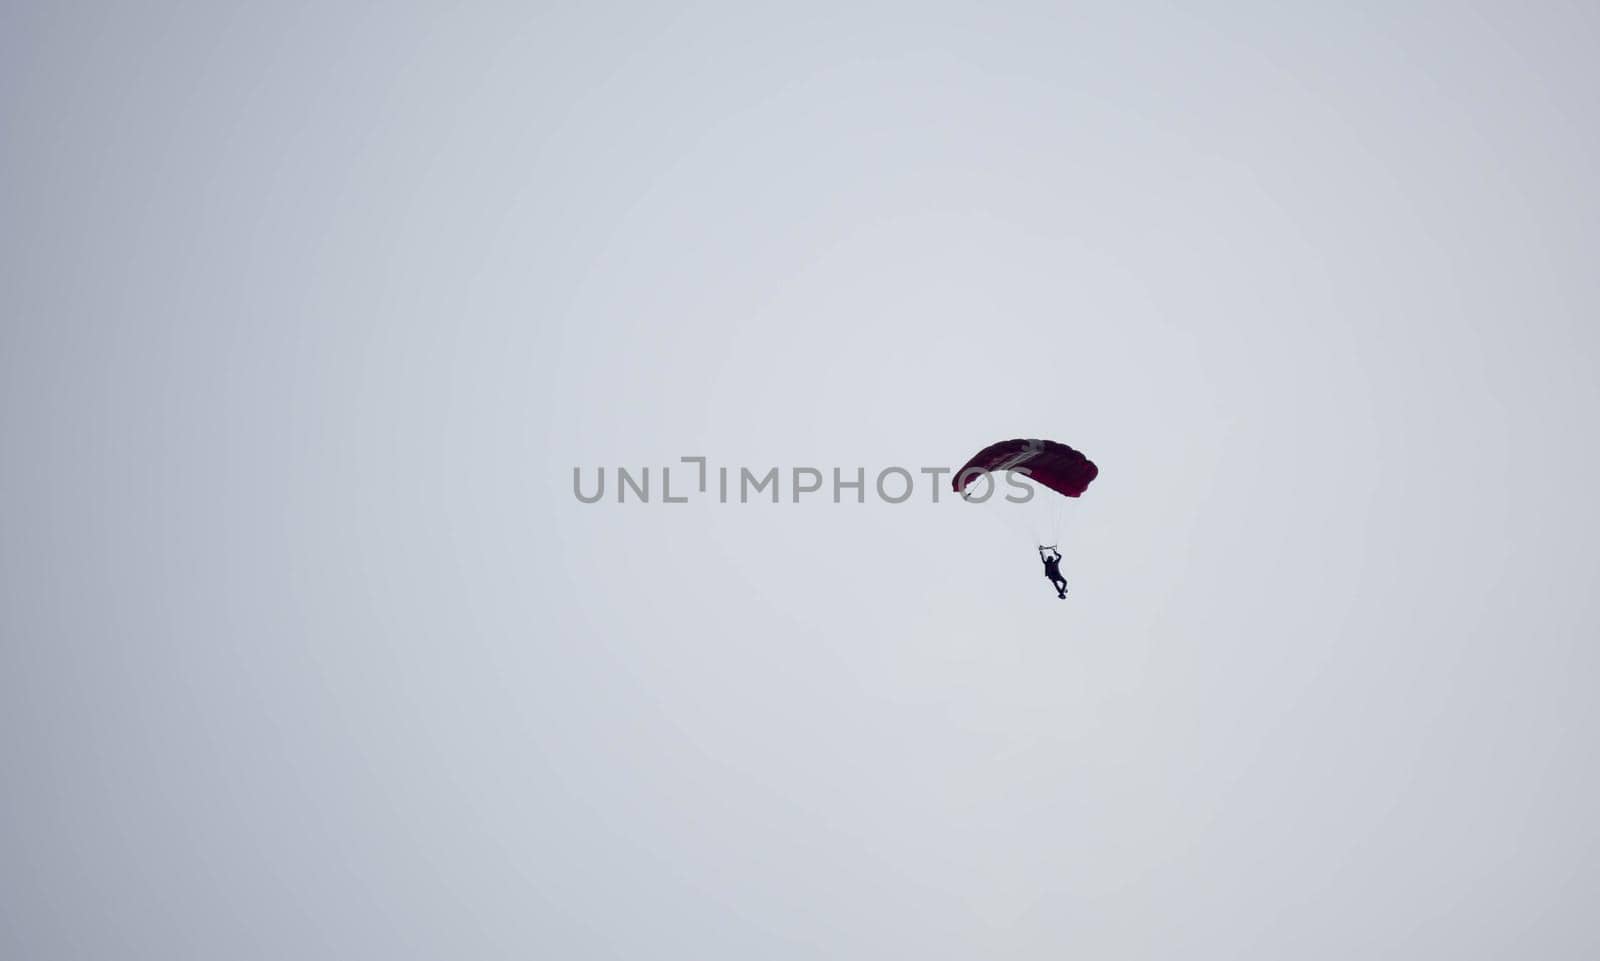 silhouette parachute stunt unfocused and blurry while gliding in the air by billroque